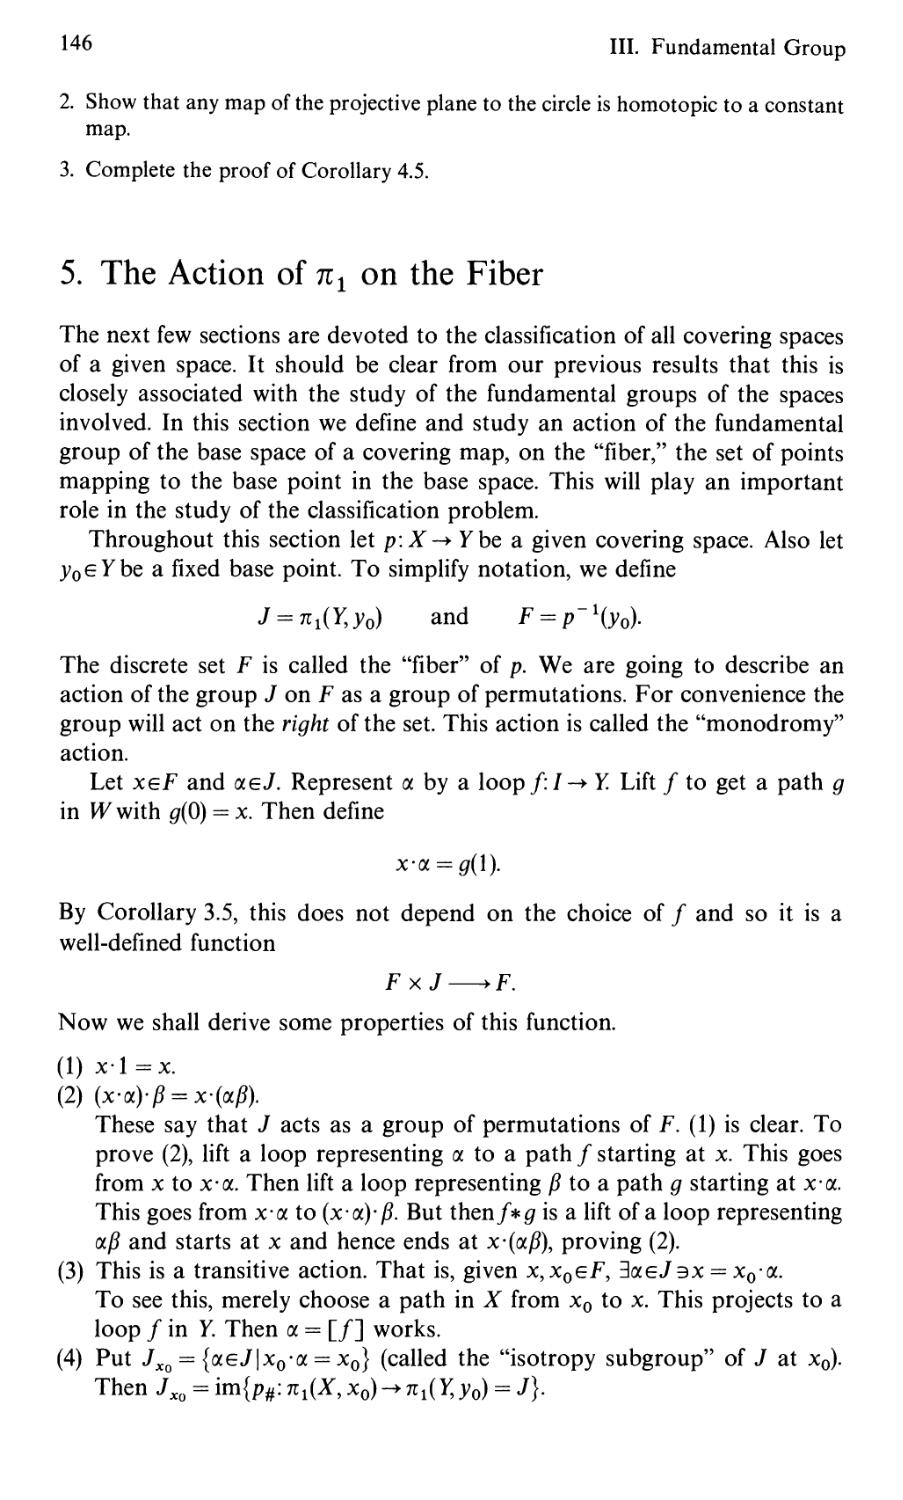 5. The Action of π₁ on the Fiber